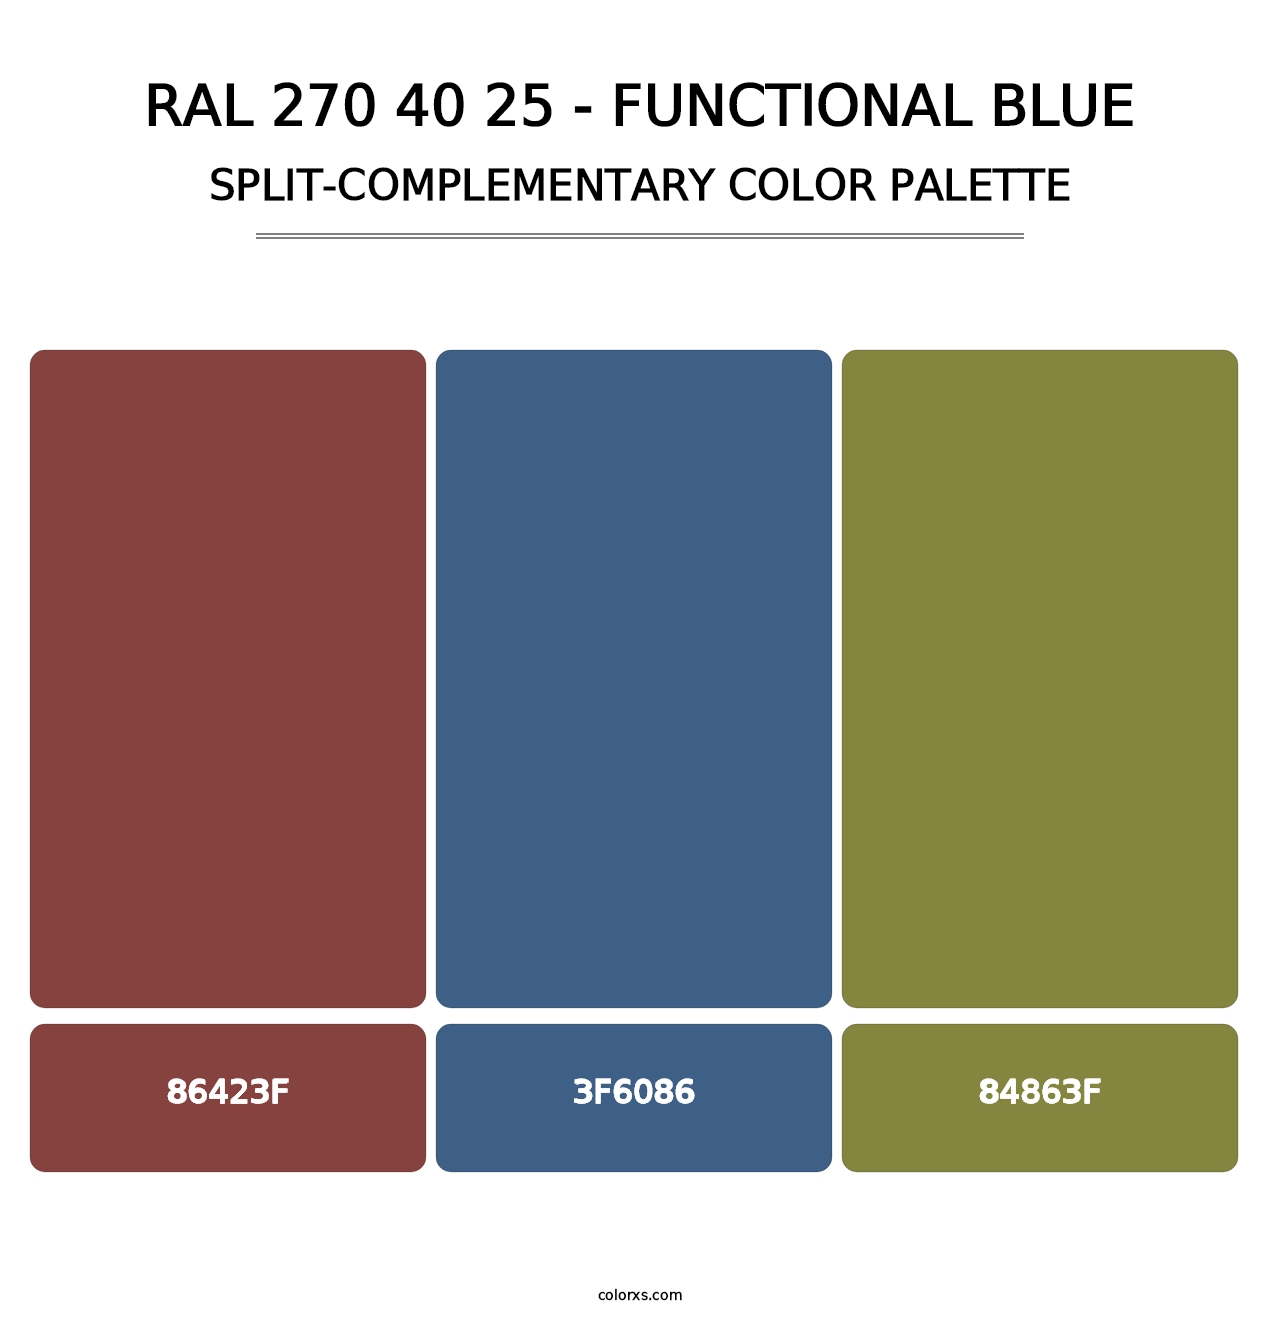 RAL 270 40 25 - Functional Blue - Split-Complementary Color Palette